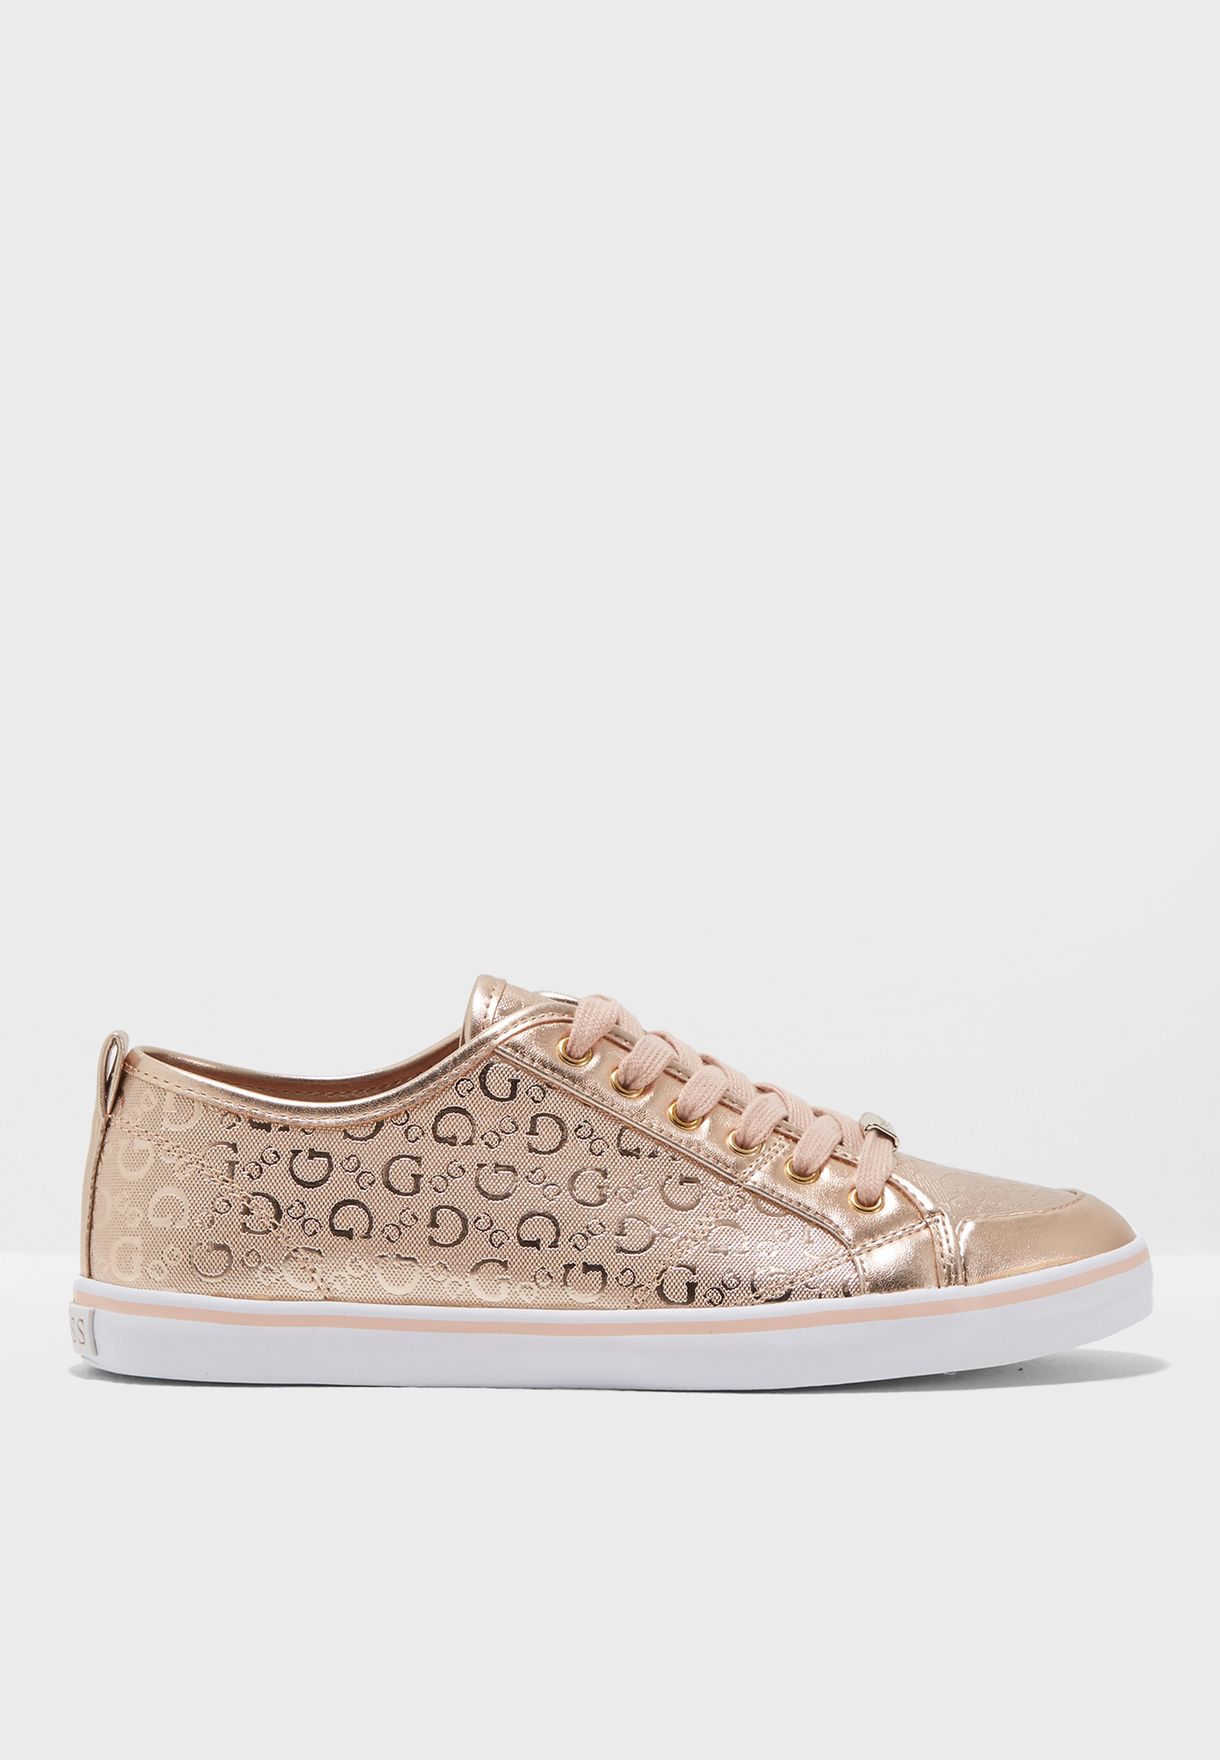 guess rose gold shoes